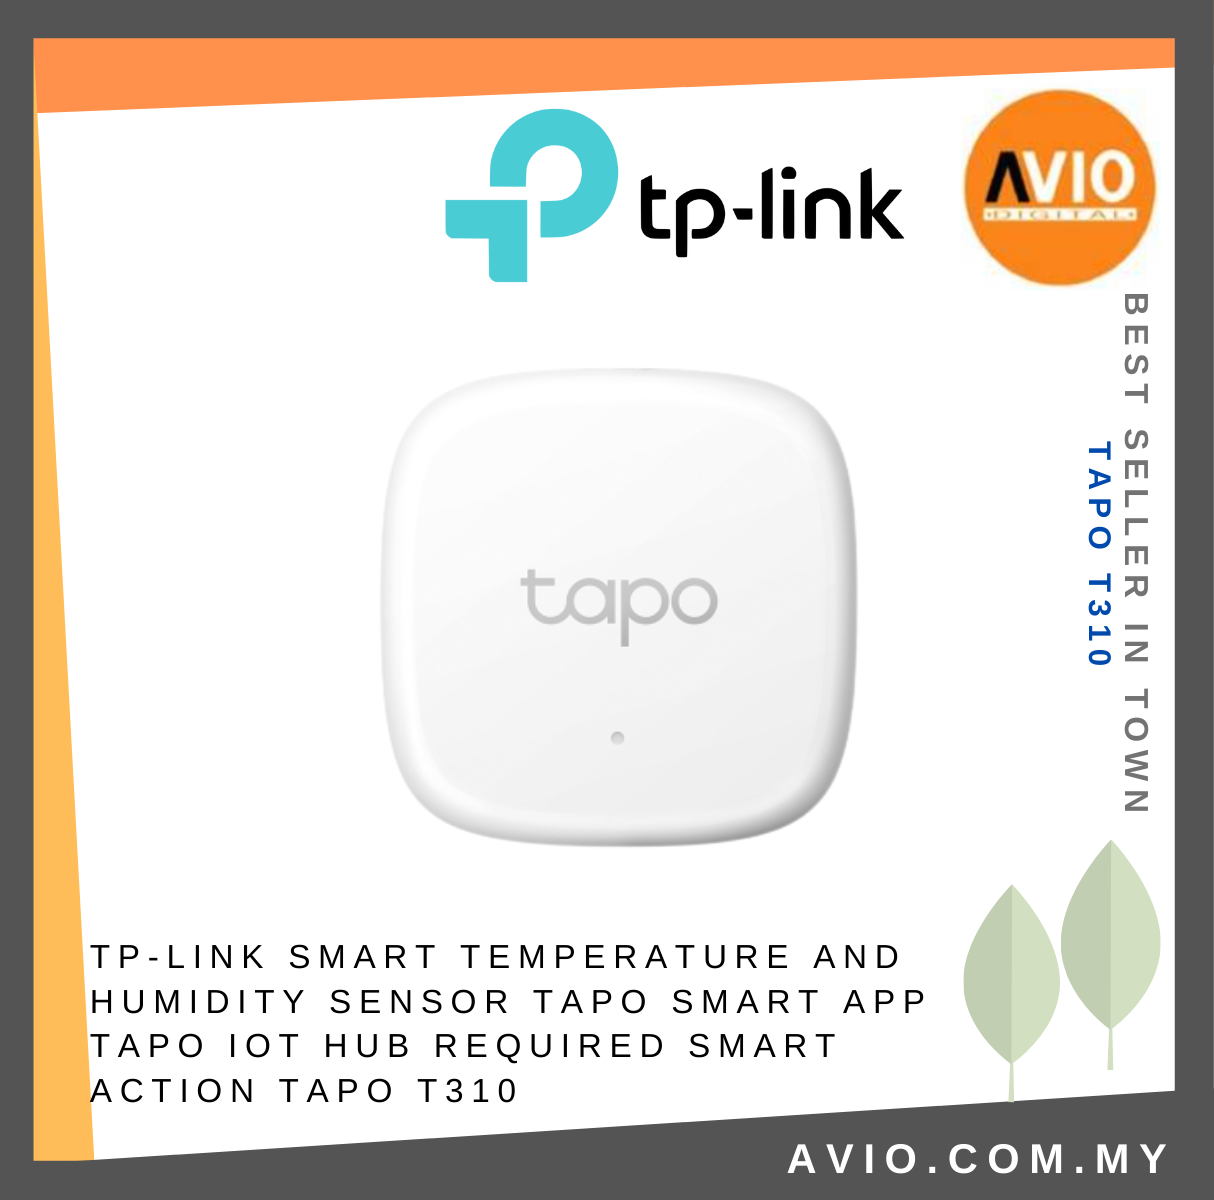 TP-LINK Tplink Smart Home Temperature and Humidity Sensor Smart App Tapo  IoT Hub Required Easy Install White Tapo T310 TAPO TP-LINK Johor Bahru  (JB), Kempas, Johor Jaya Supplier, Suppliers, Supply, Supplies